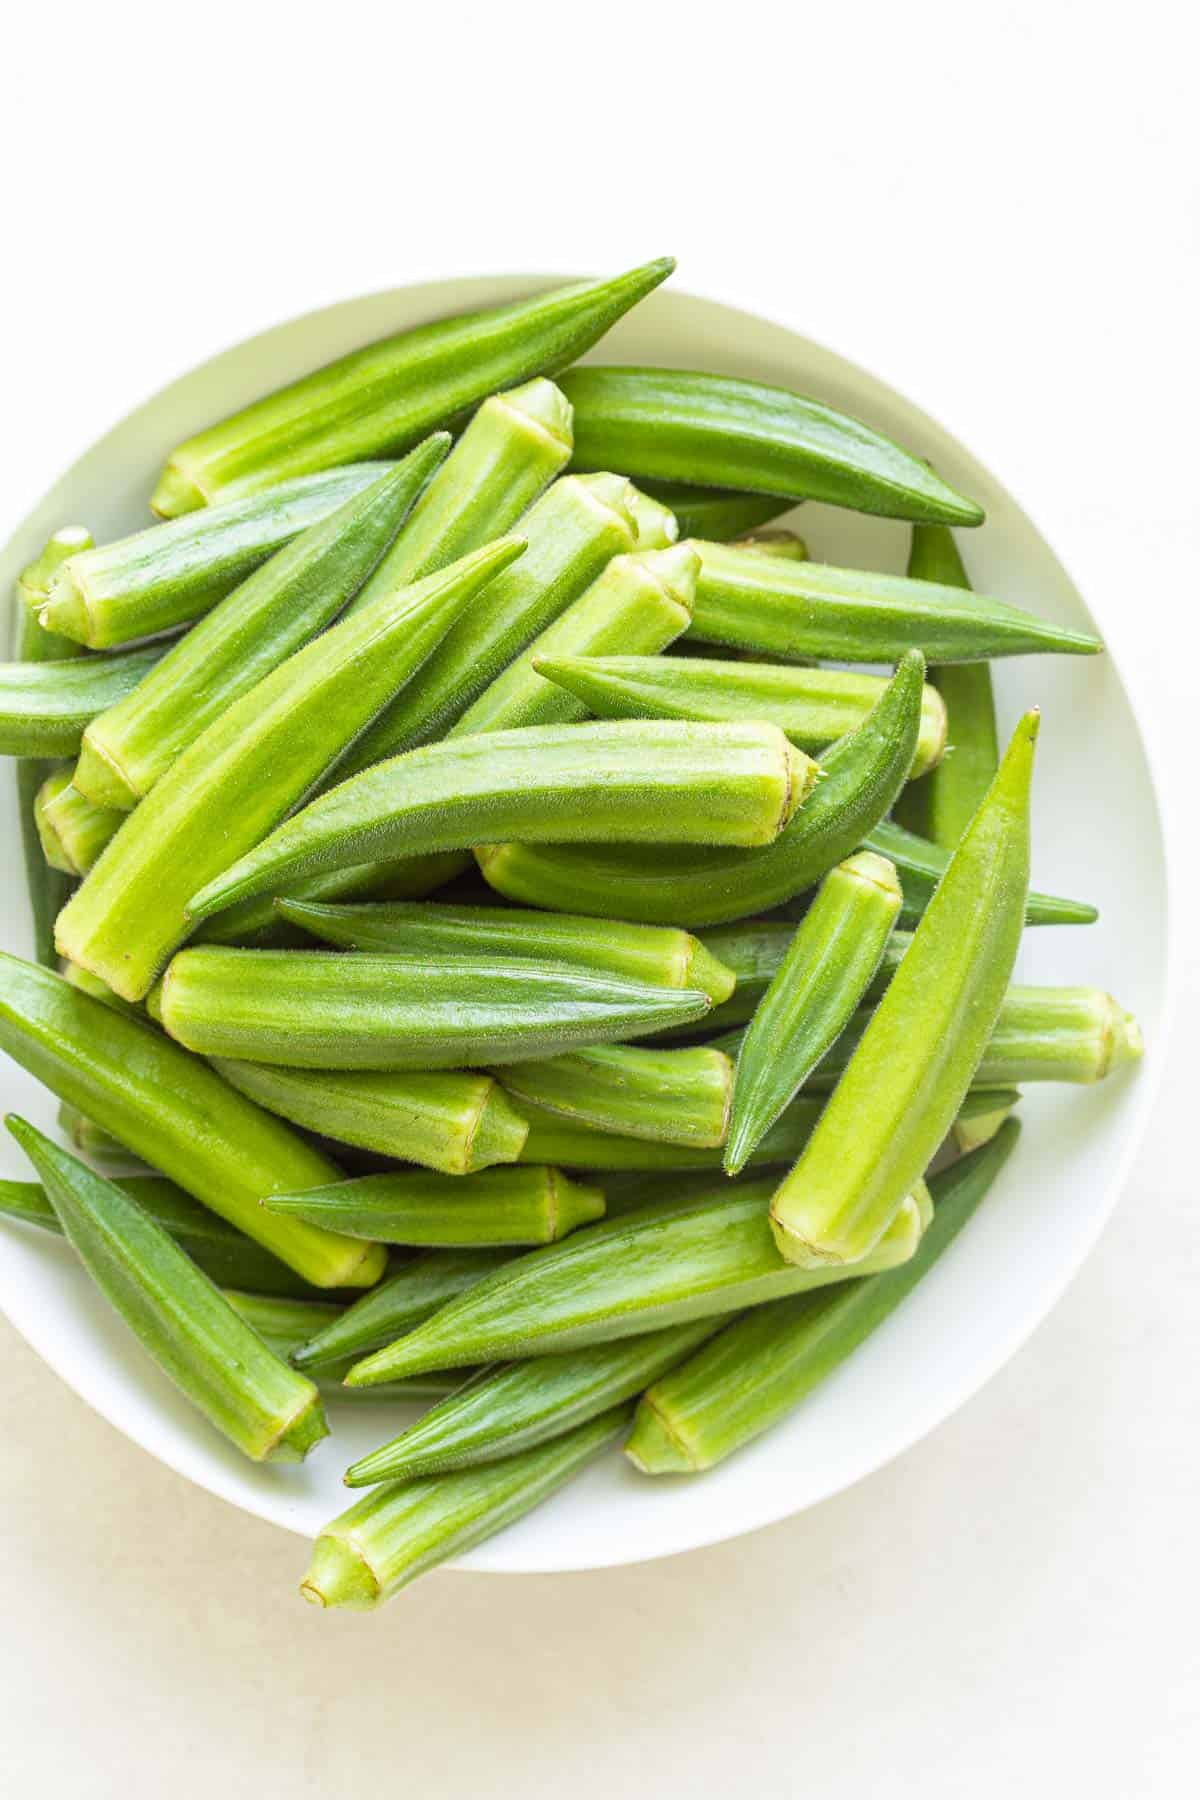 Overhead view of fresh okra pods in a white bowl.